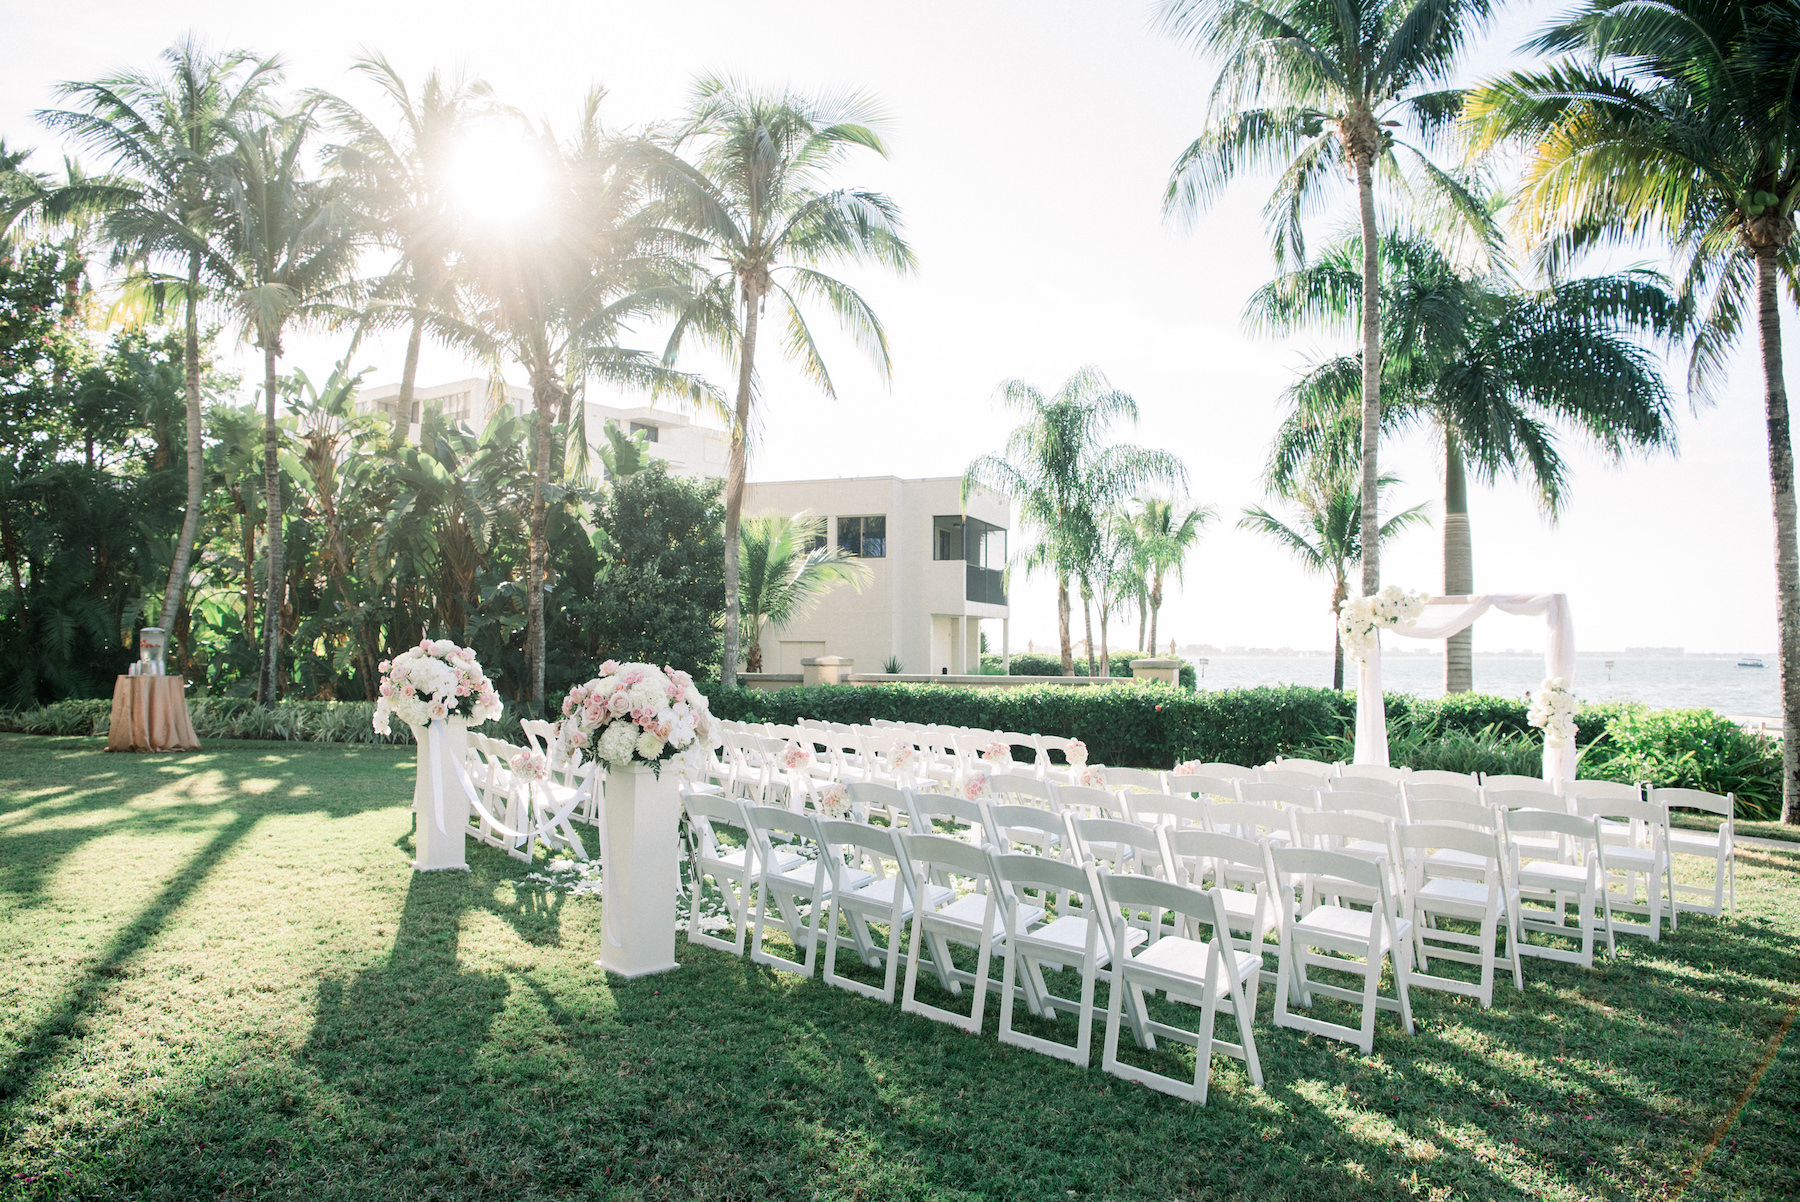 Classic Elegant Waterfront Garden Wedding Ceremony Decor, White Folding Chairs, Pedestals with Floral Arrangements, Rectangular Arch with Draping | Hotel Wedding Venue Ritz Carlton Sarasota | Tampa Wedding Planner Special Moments Event Planning